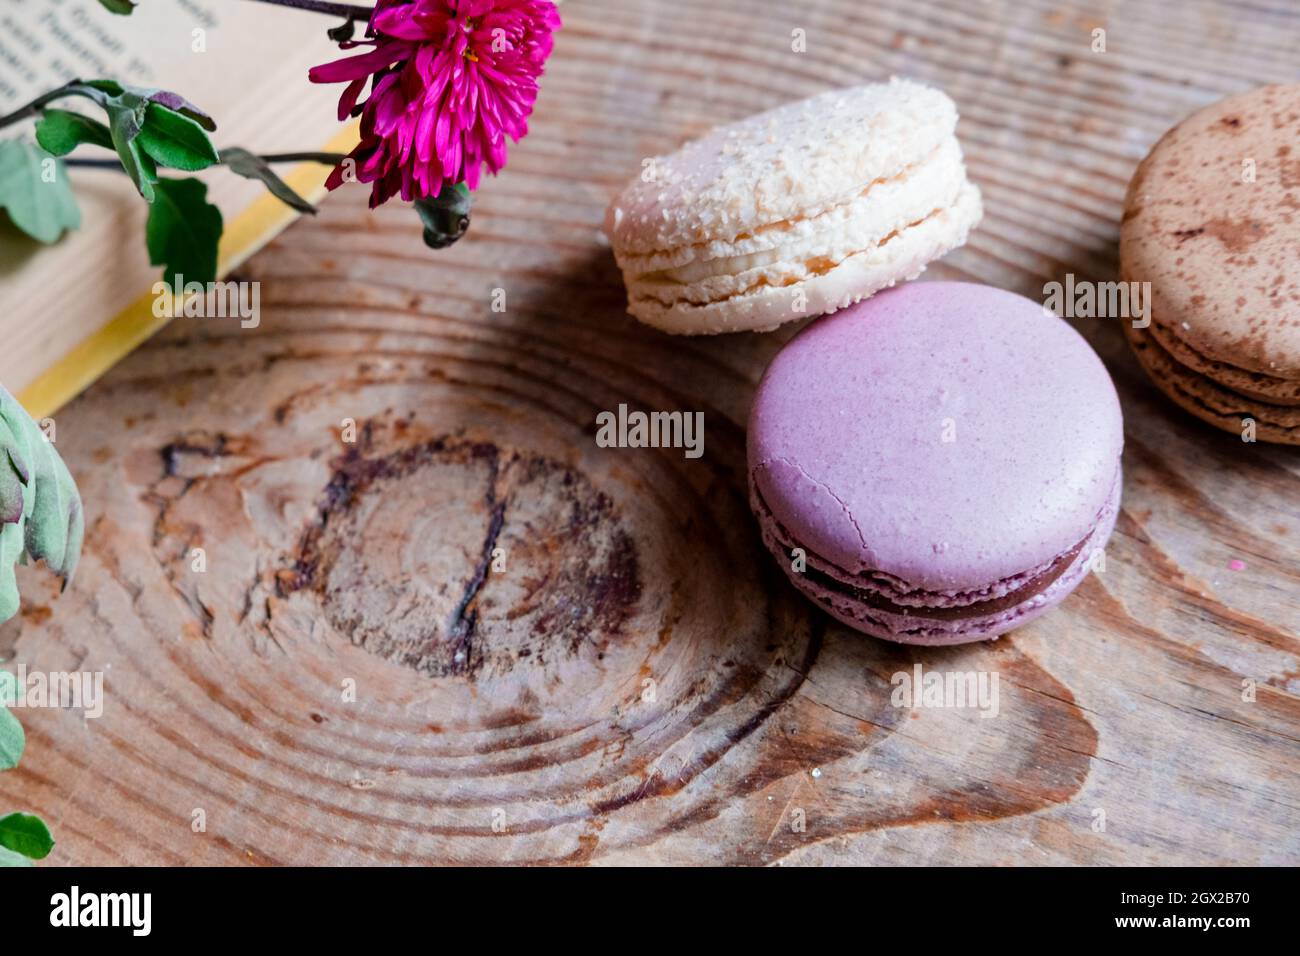 macarons on the background of the book, on a wooden table. horizontal frame. Aesthetics with macaroons and a book. Beautiful cakes on a wooden table Stock Photo